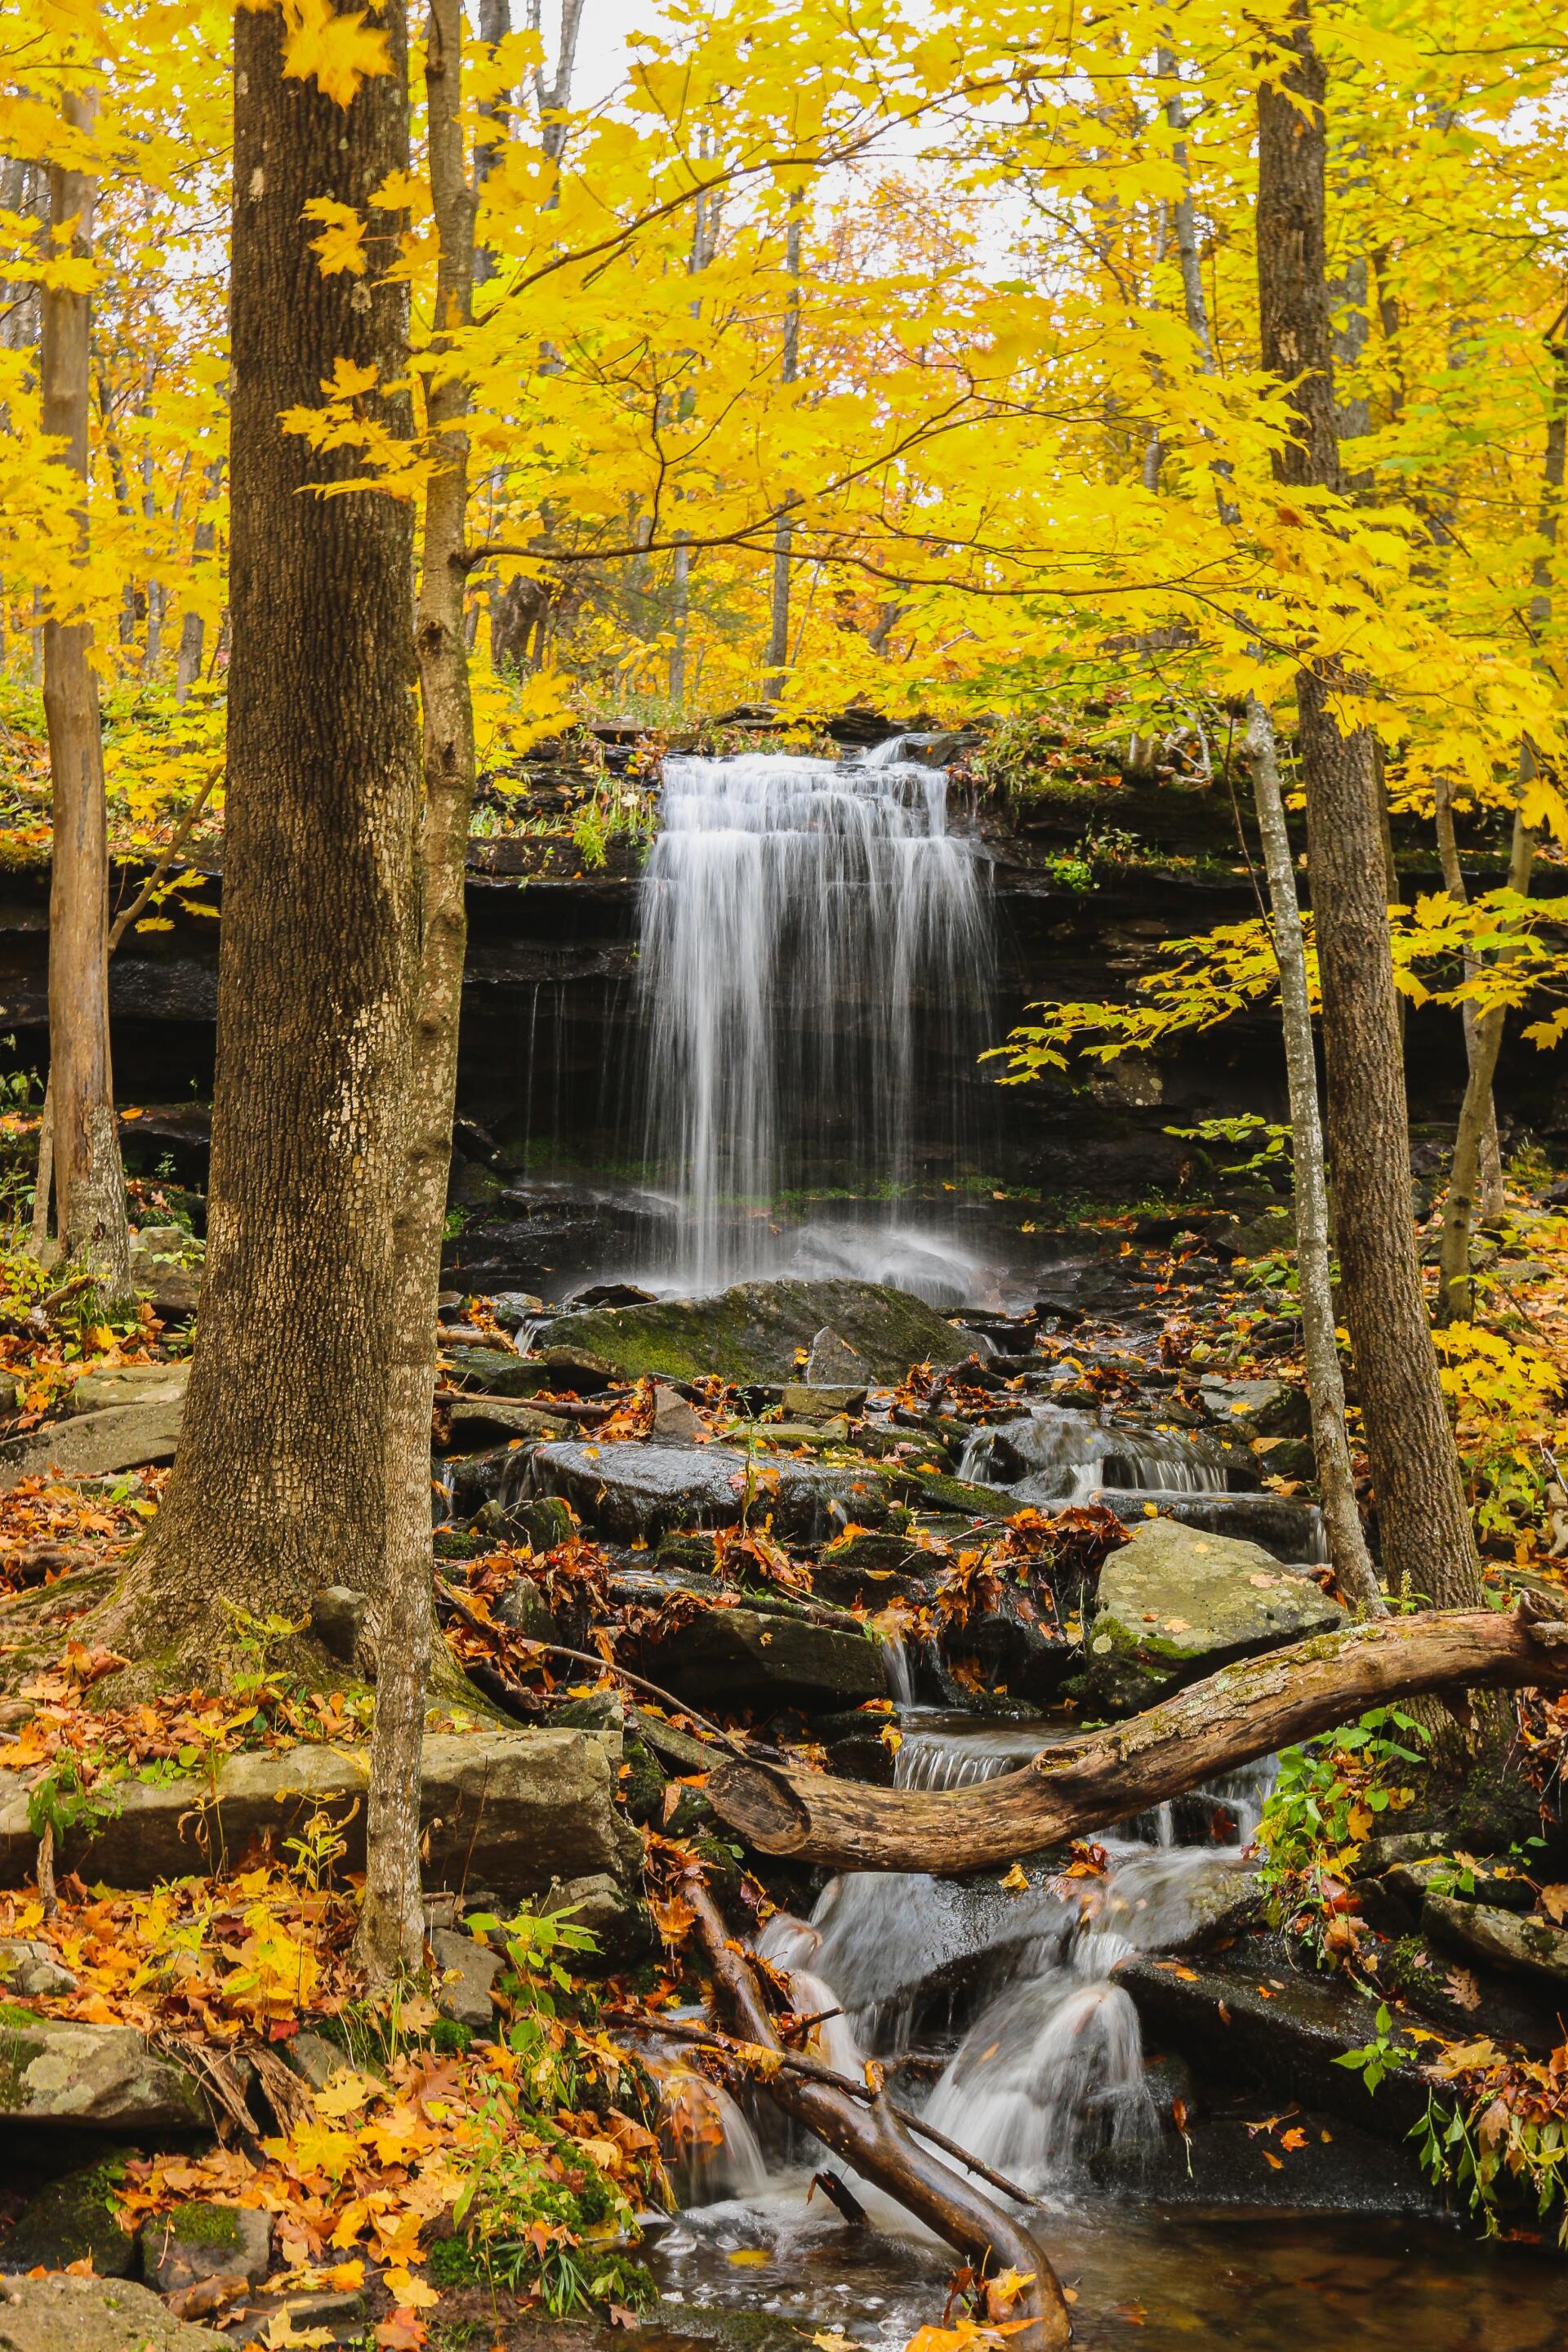 a waterfall in the middle of a forest with yellow leaves on the trees .